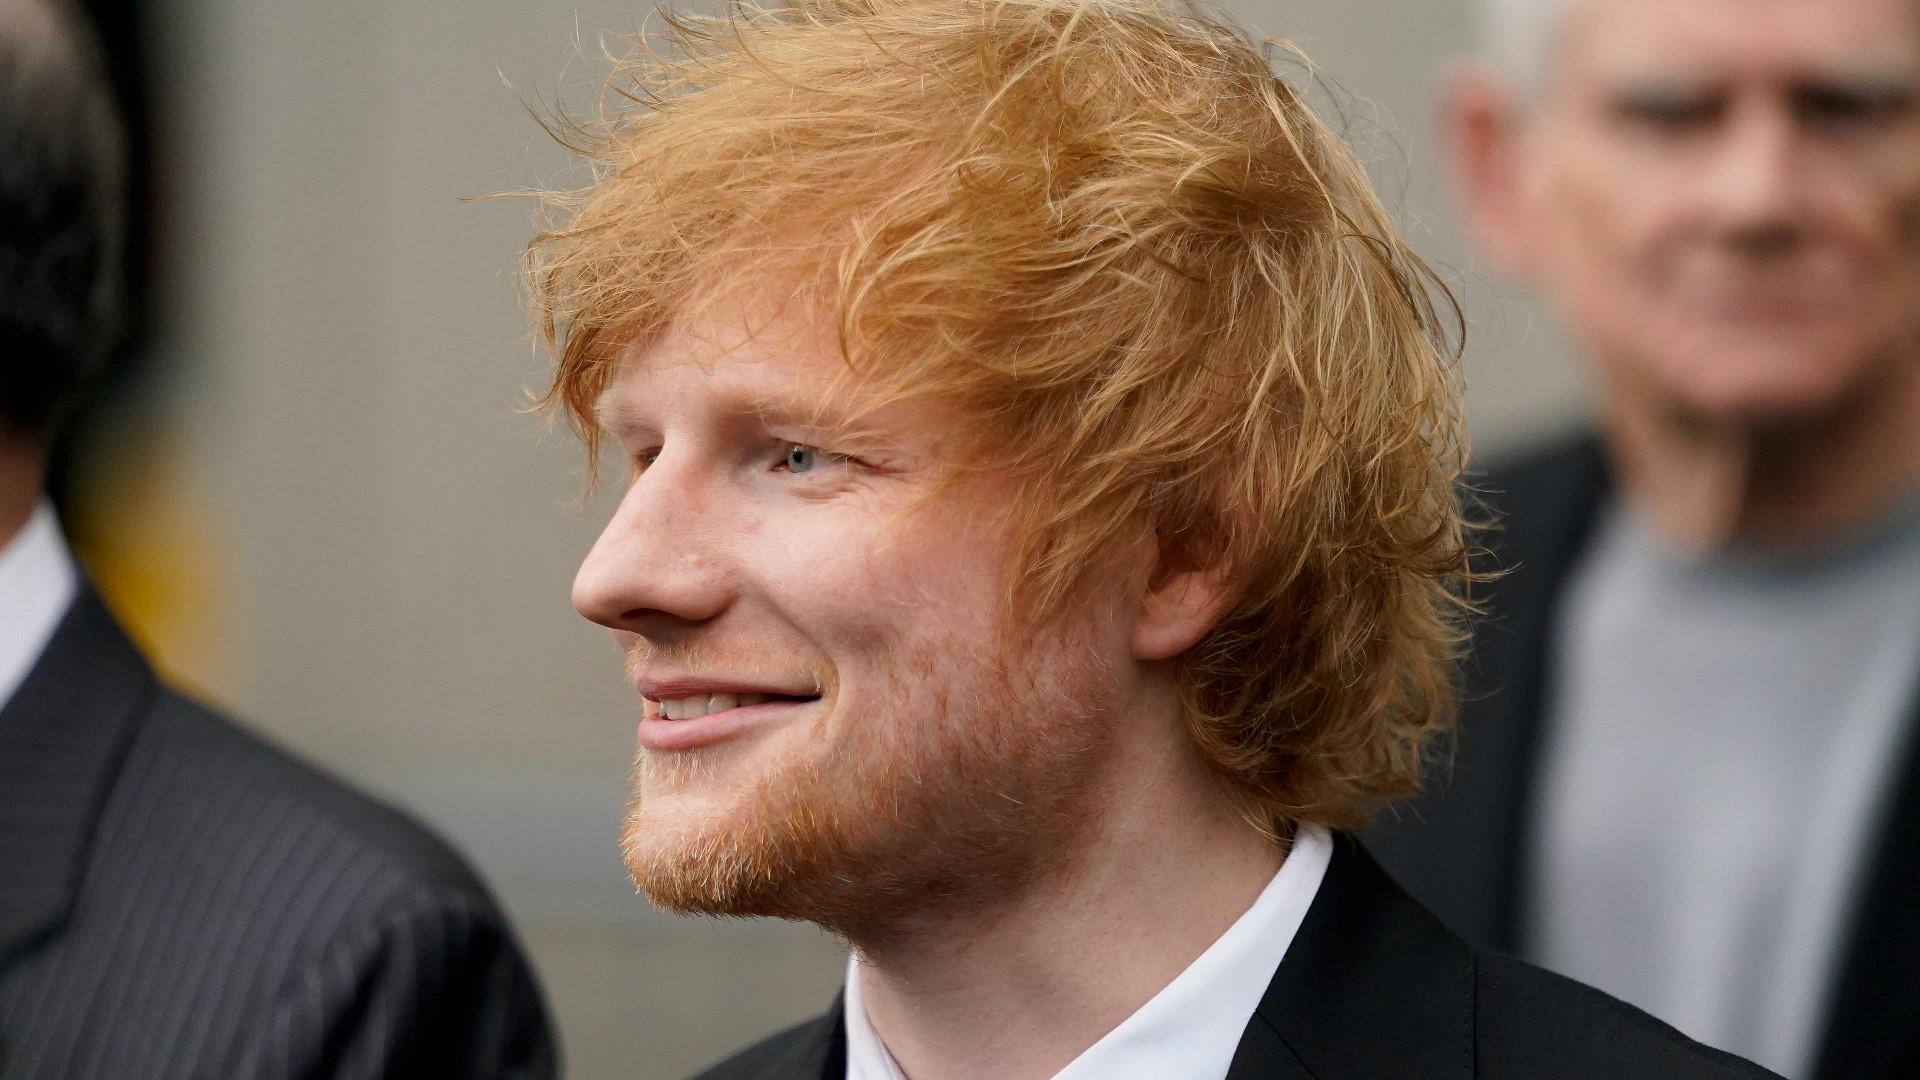 After a jury concluded he didn't copy a Marvin Gaye classic song, Ed Sheeran revealed he missed his grandma's funeral because of the trial in New York.